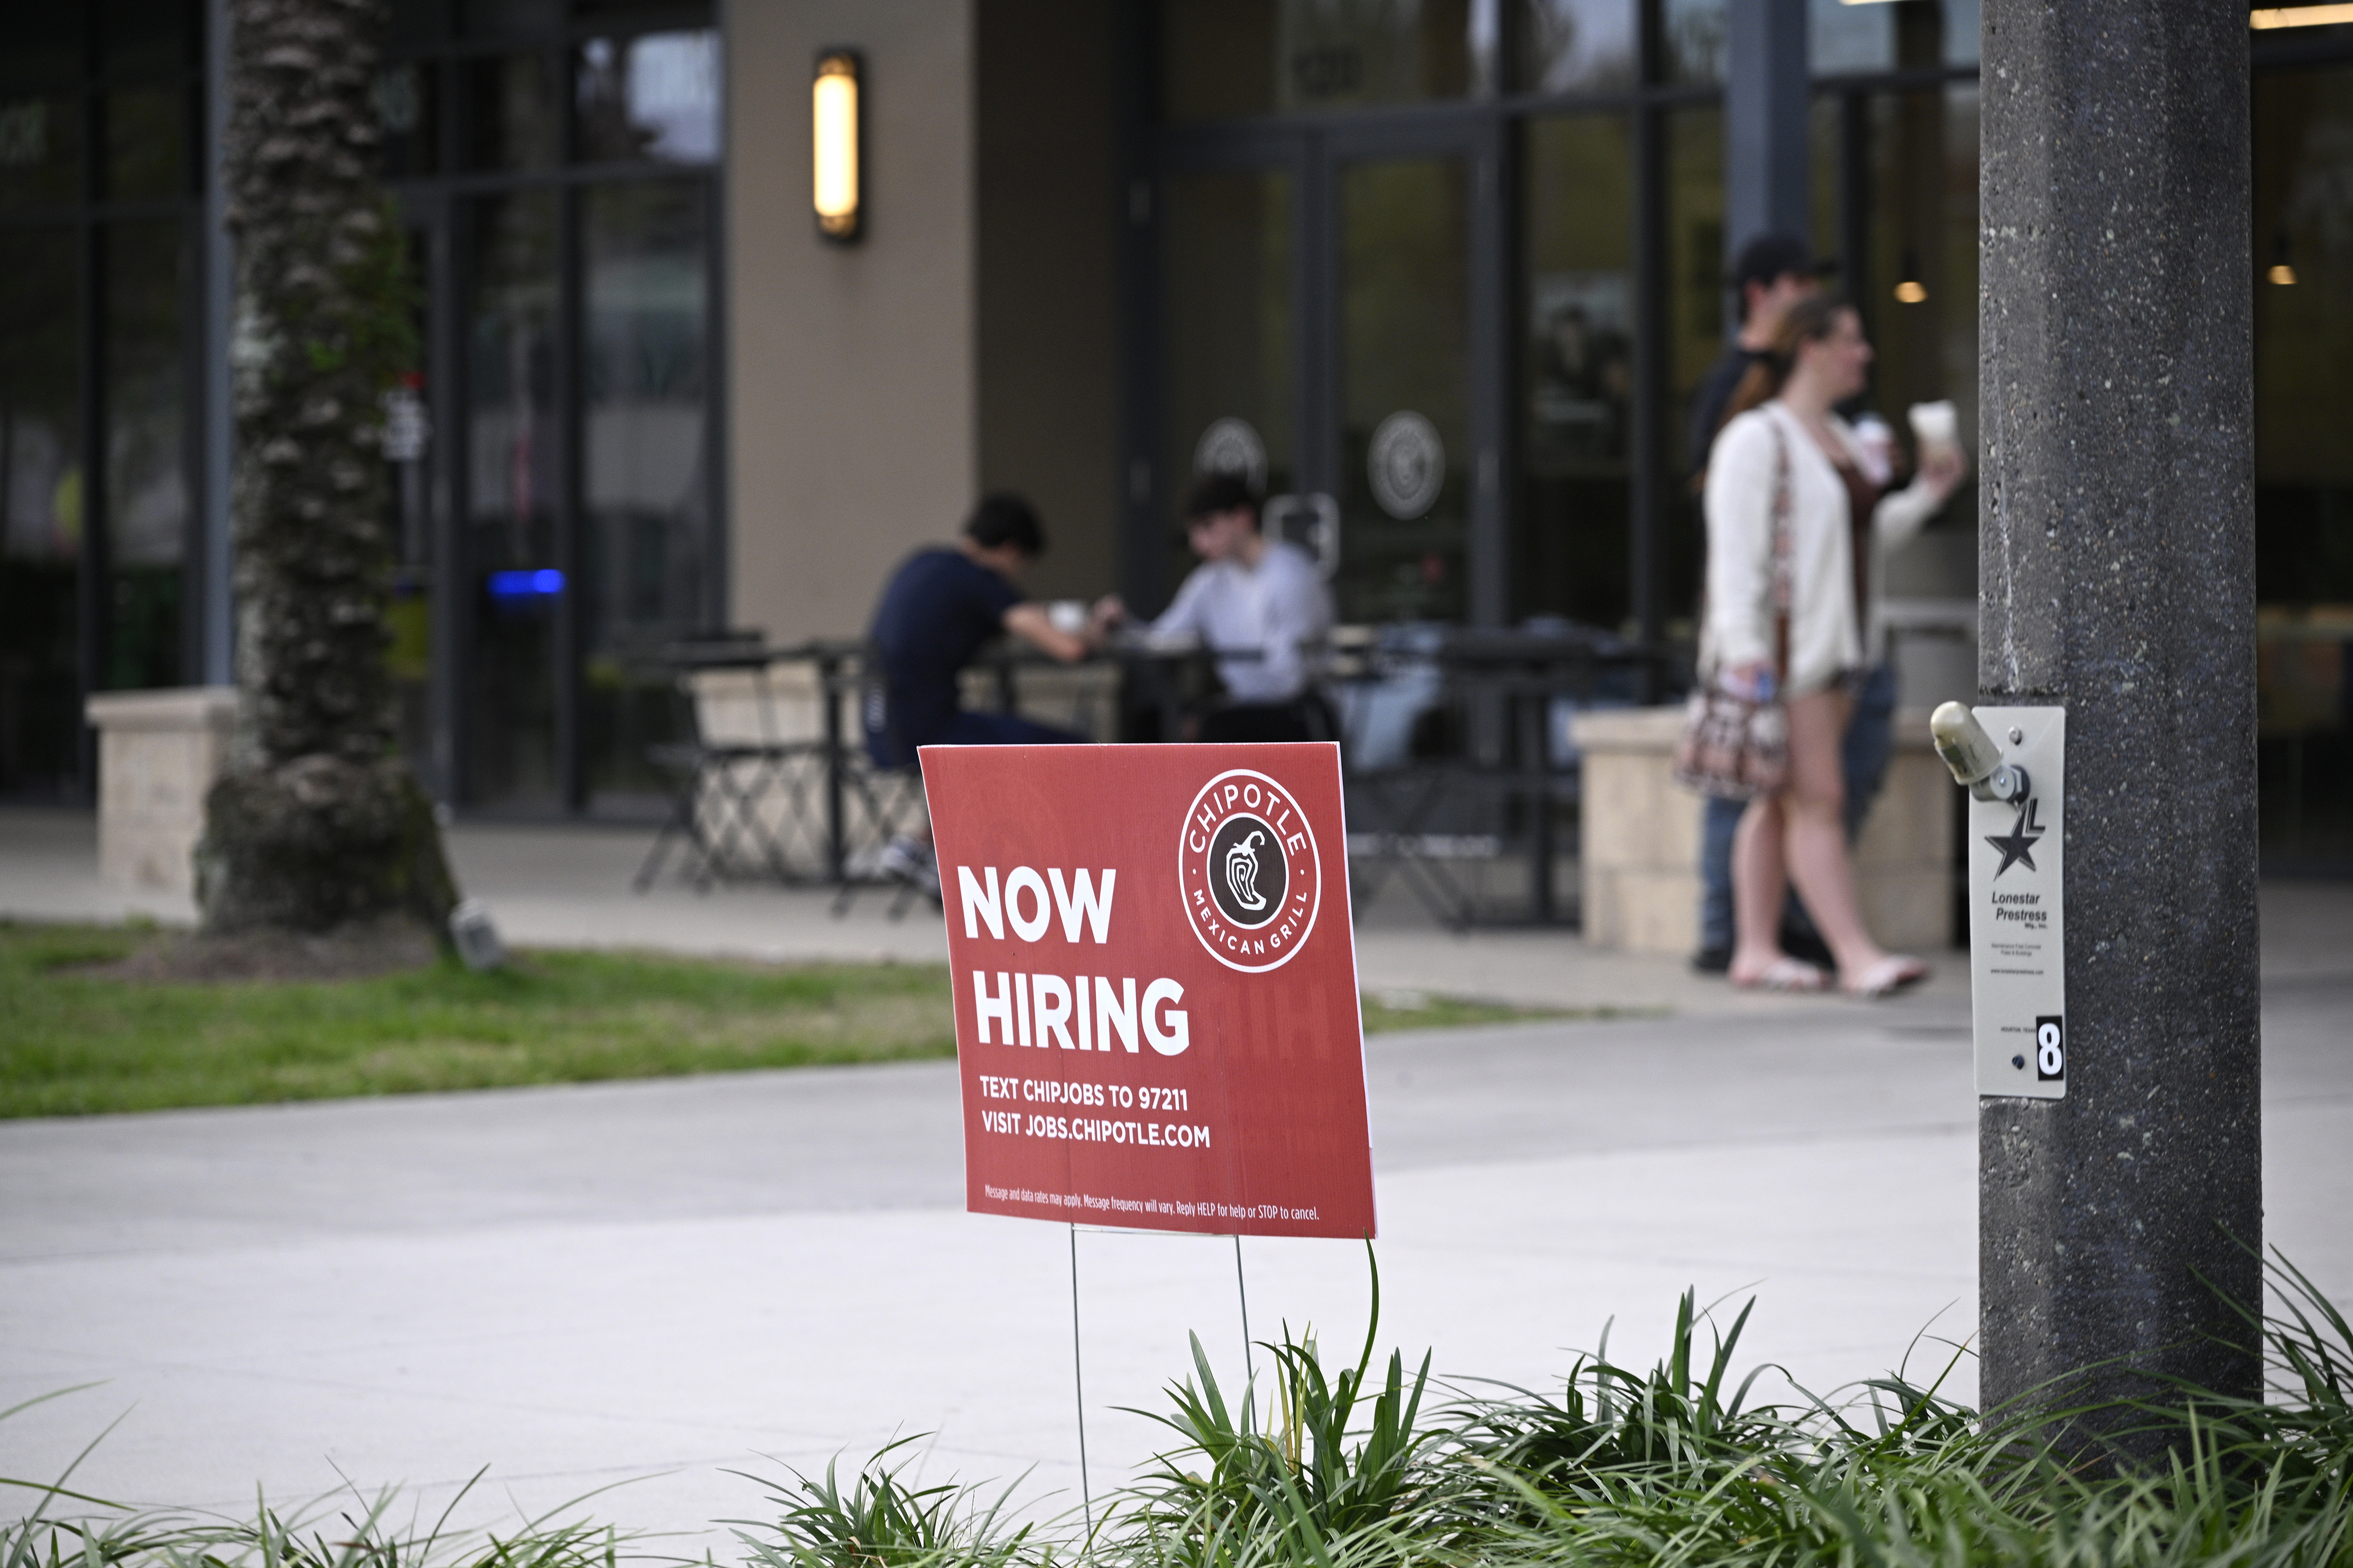 A “Now Hiring” sign advertising job openings is pictured outside a Chipotle restaurant in Windermere, Florida, on March 18.